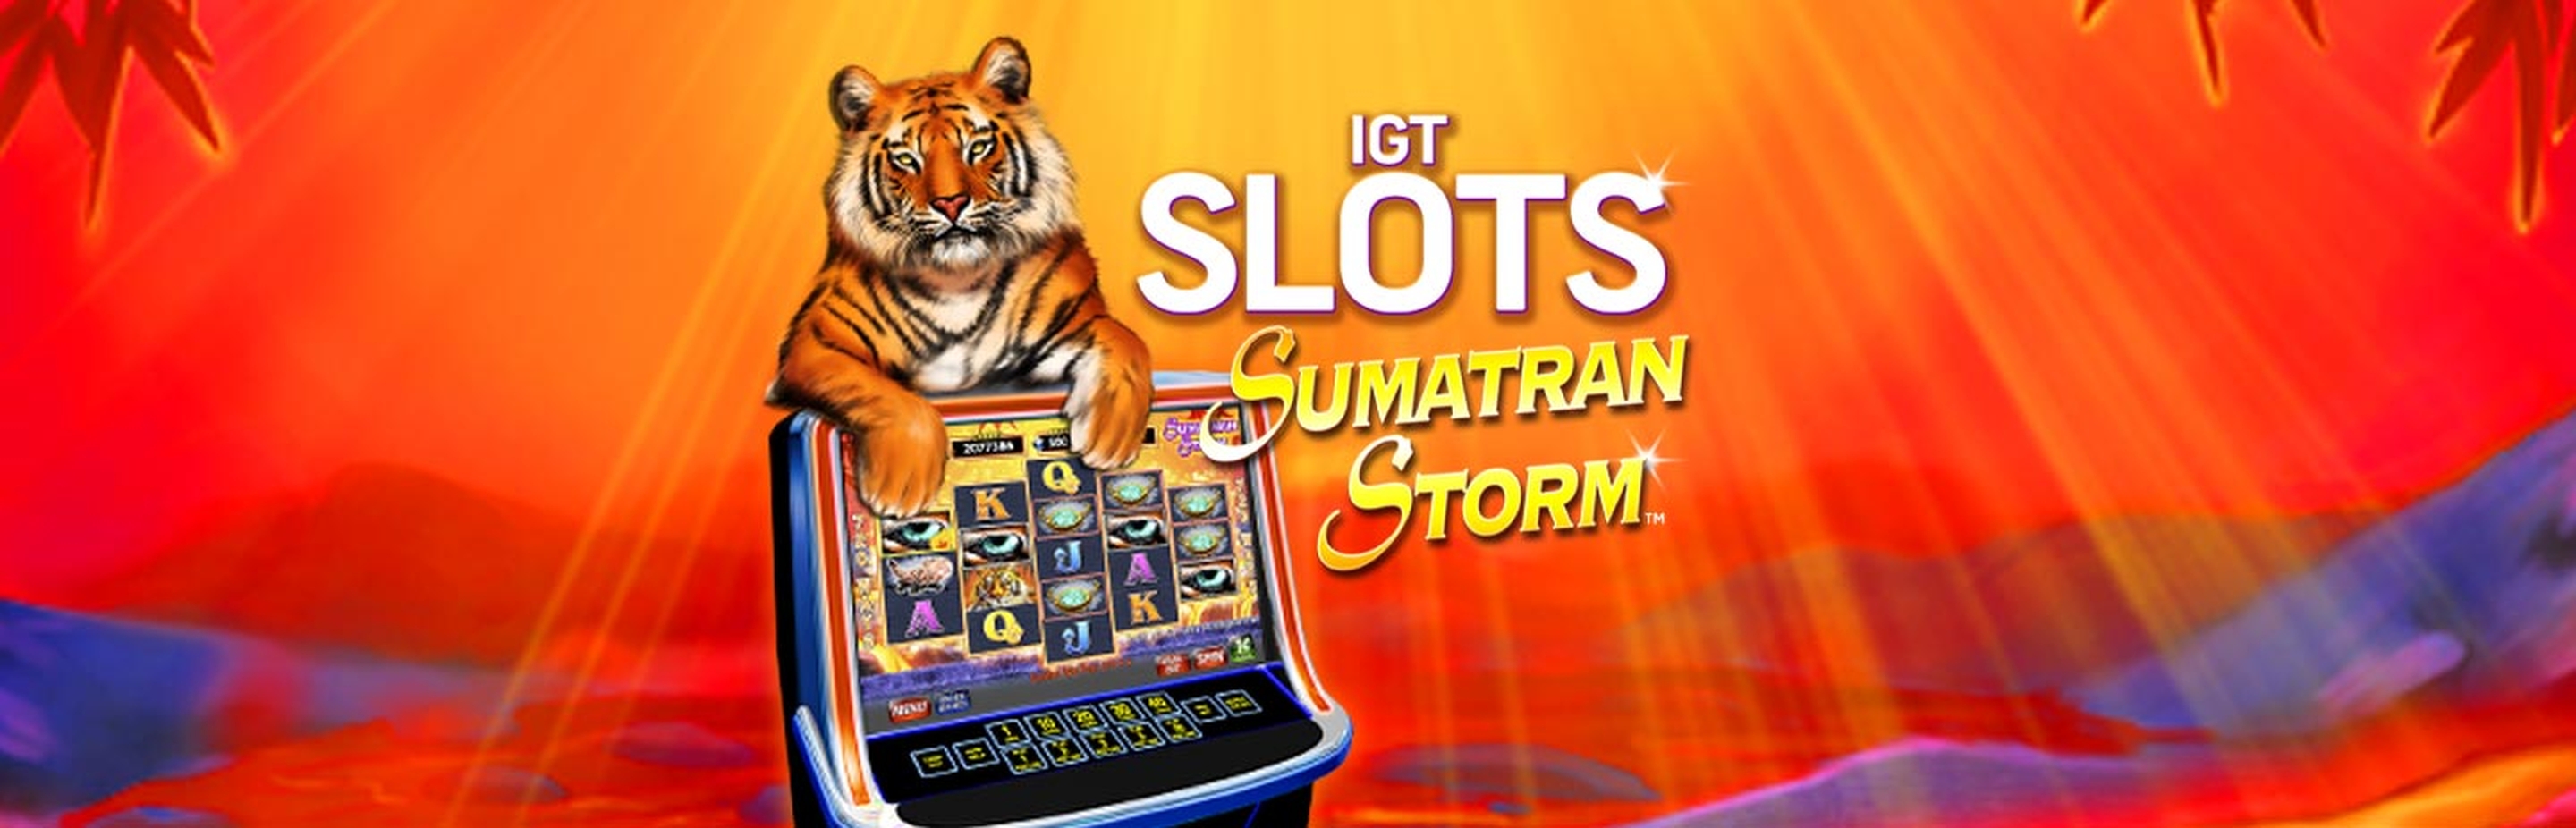 The Sumatran Storm Online Slot Demo Game by IGT